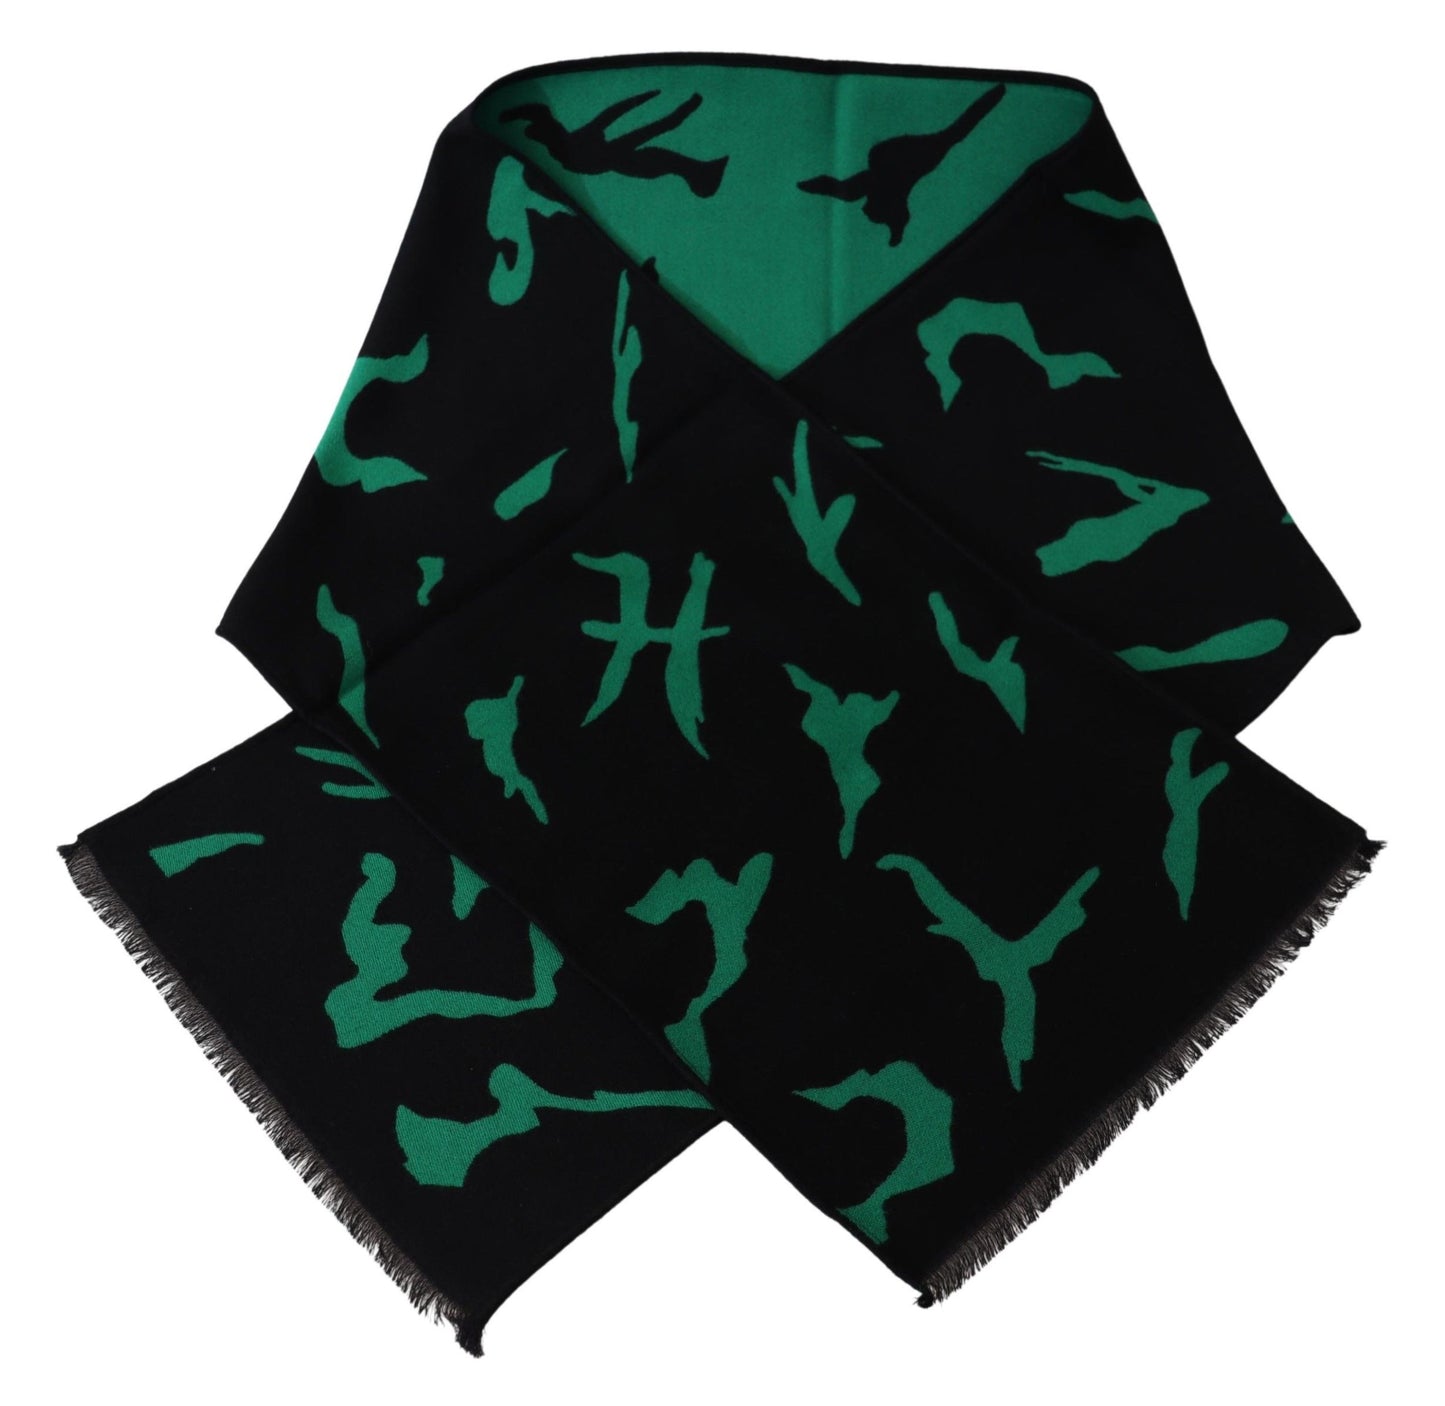 Givenchy Black Green Wool Unisex Winter Warm Scarf Wrap Shawl - Designed by Givenchy Available to Buy at a Discounted Price on Moon Behind The Hill Online Designer Discount Store